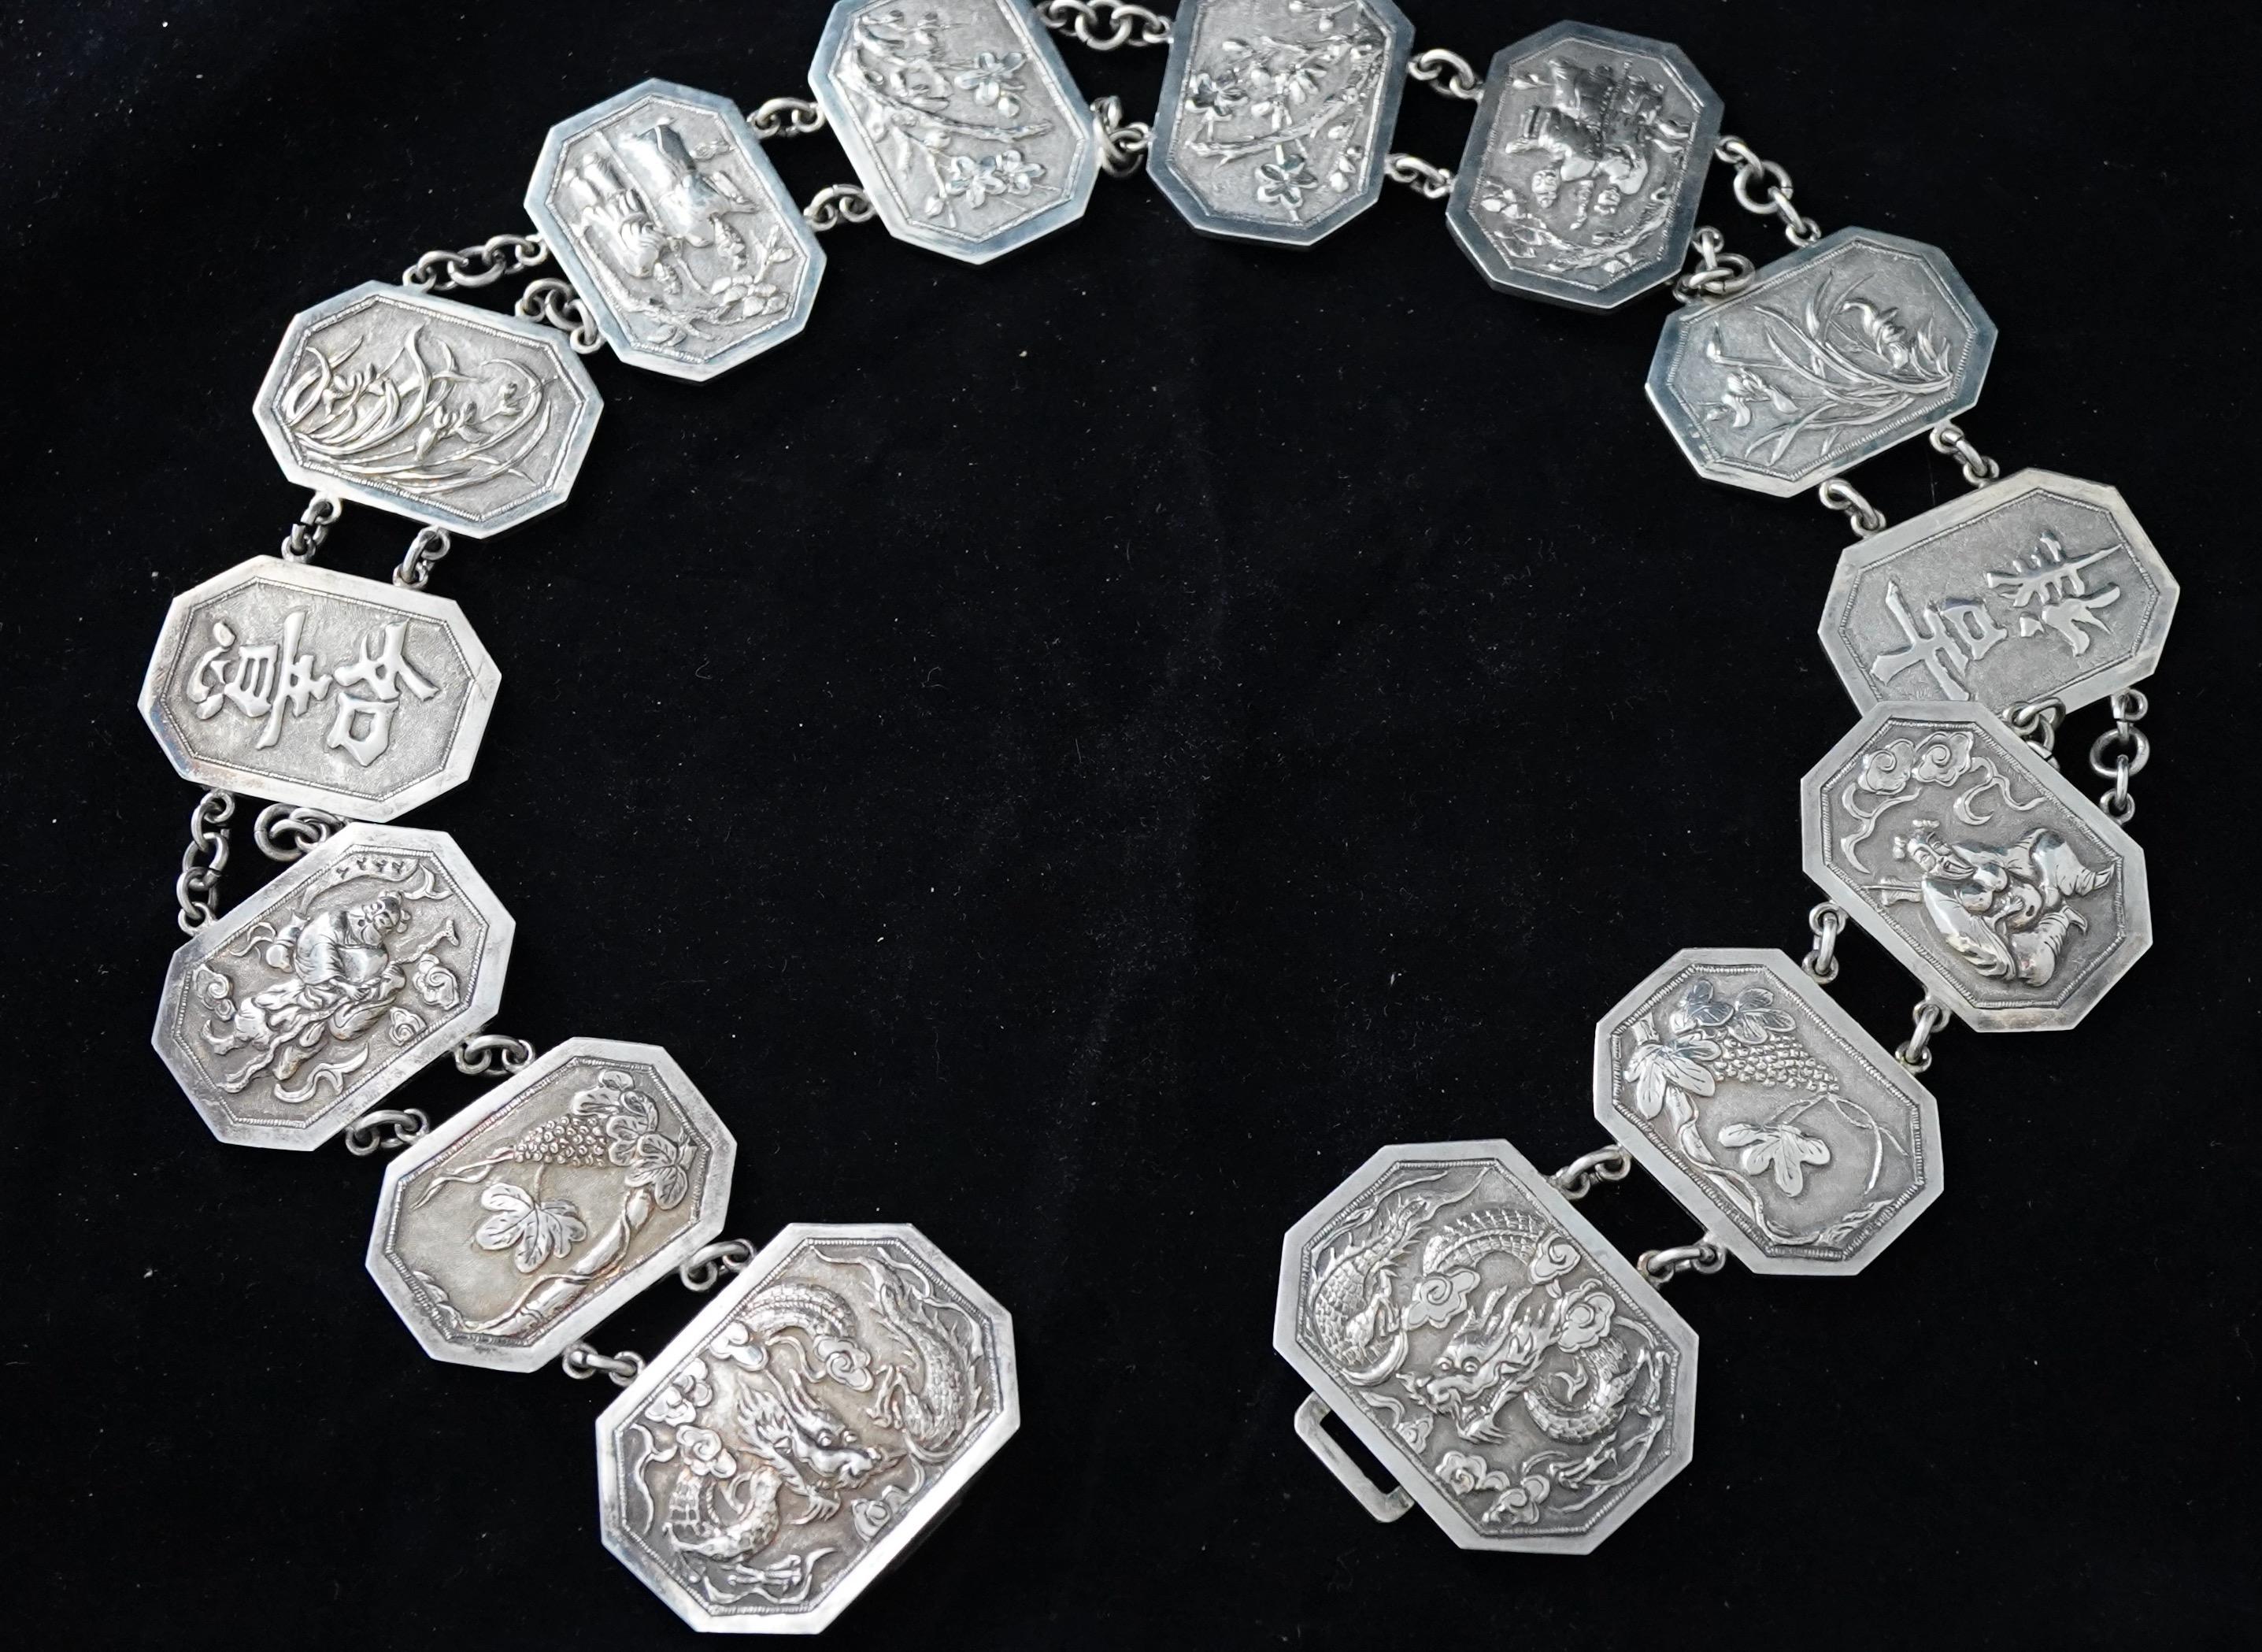 Chinese export silver ladies belt in fine repousse technique. The belt has a two-piece buckle and 12 medallions in 6 different patterns. The belt is 26 3/4